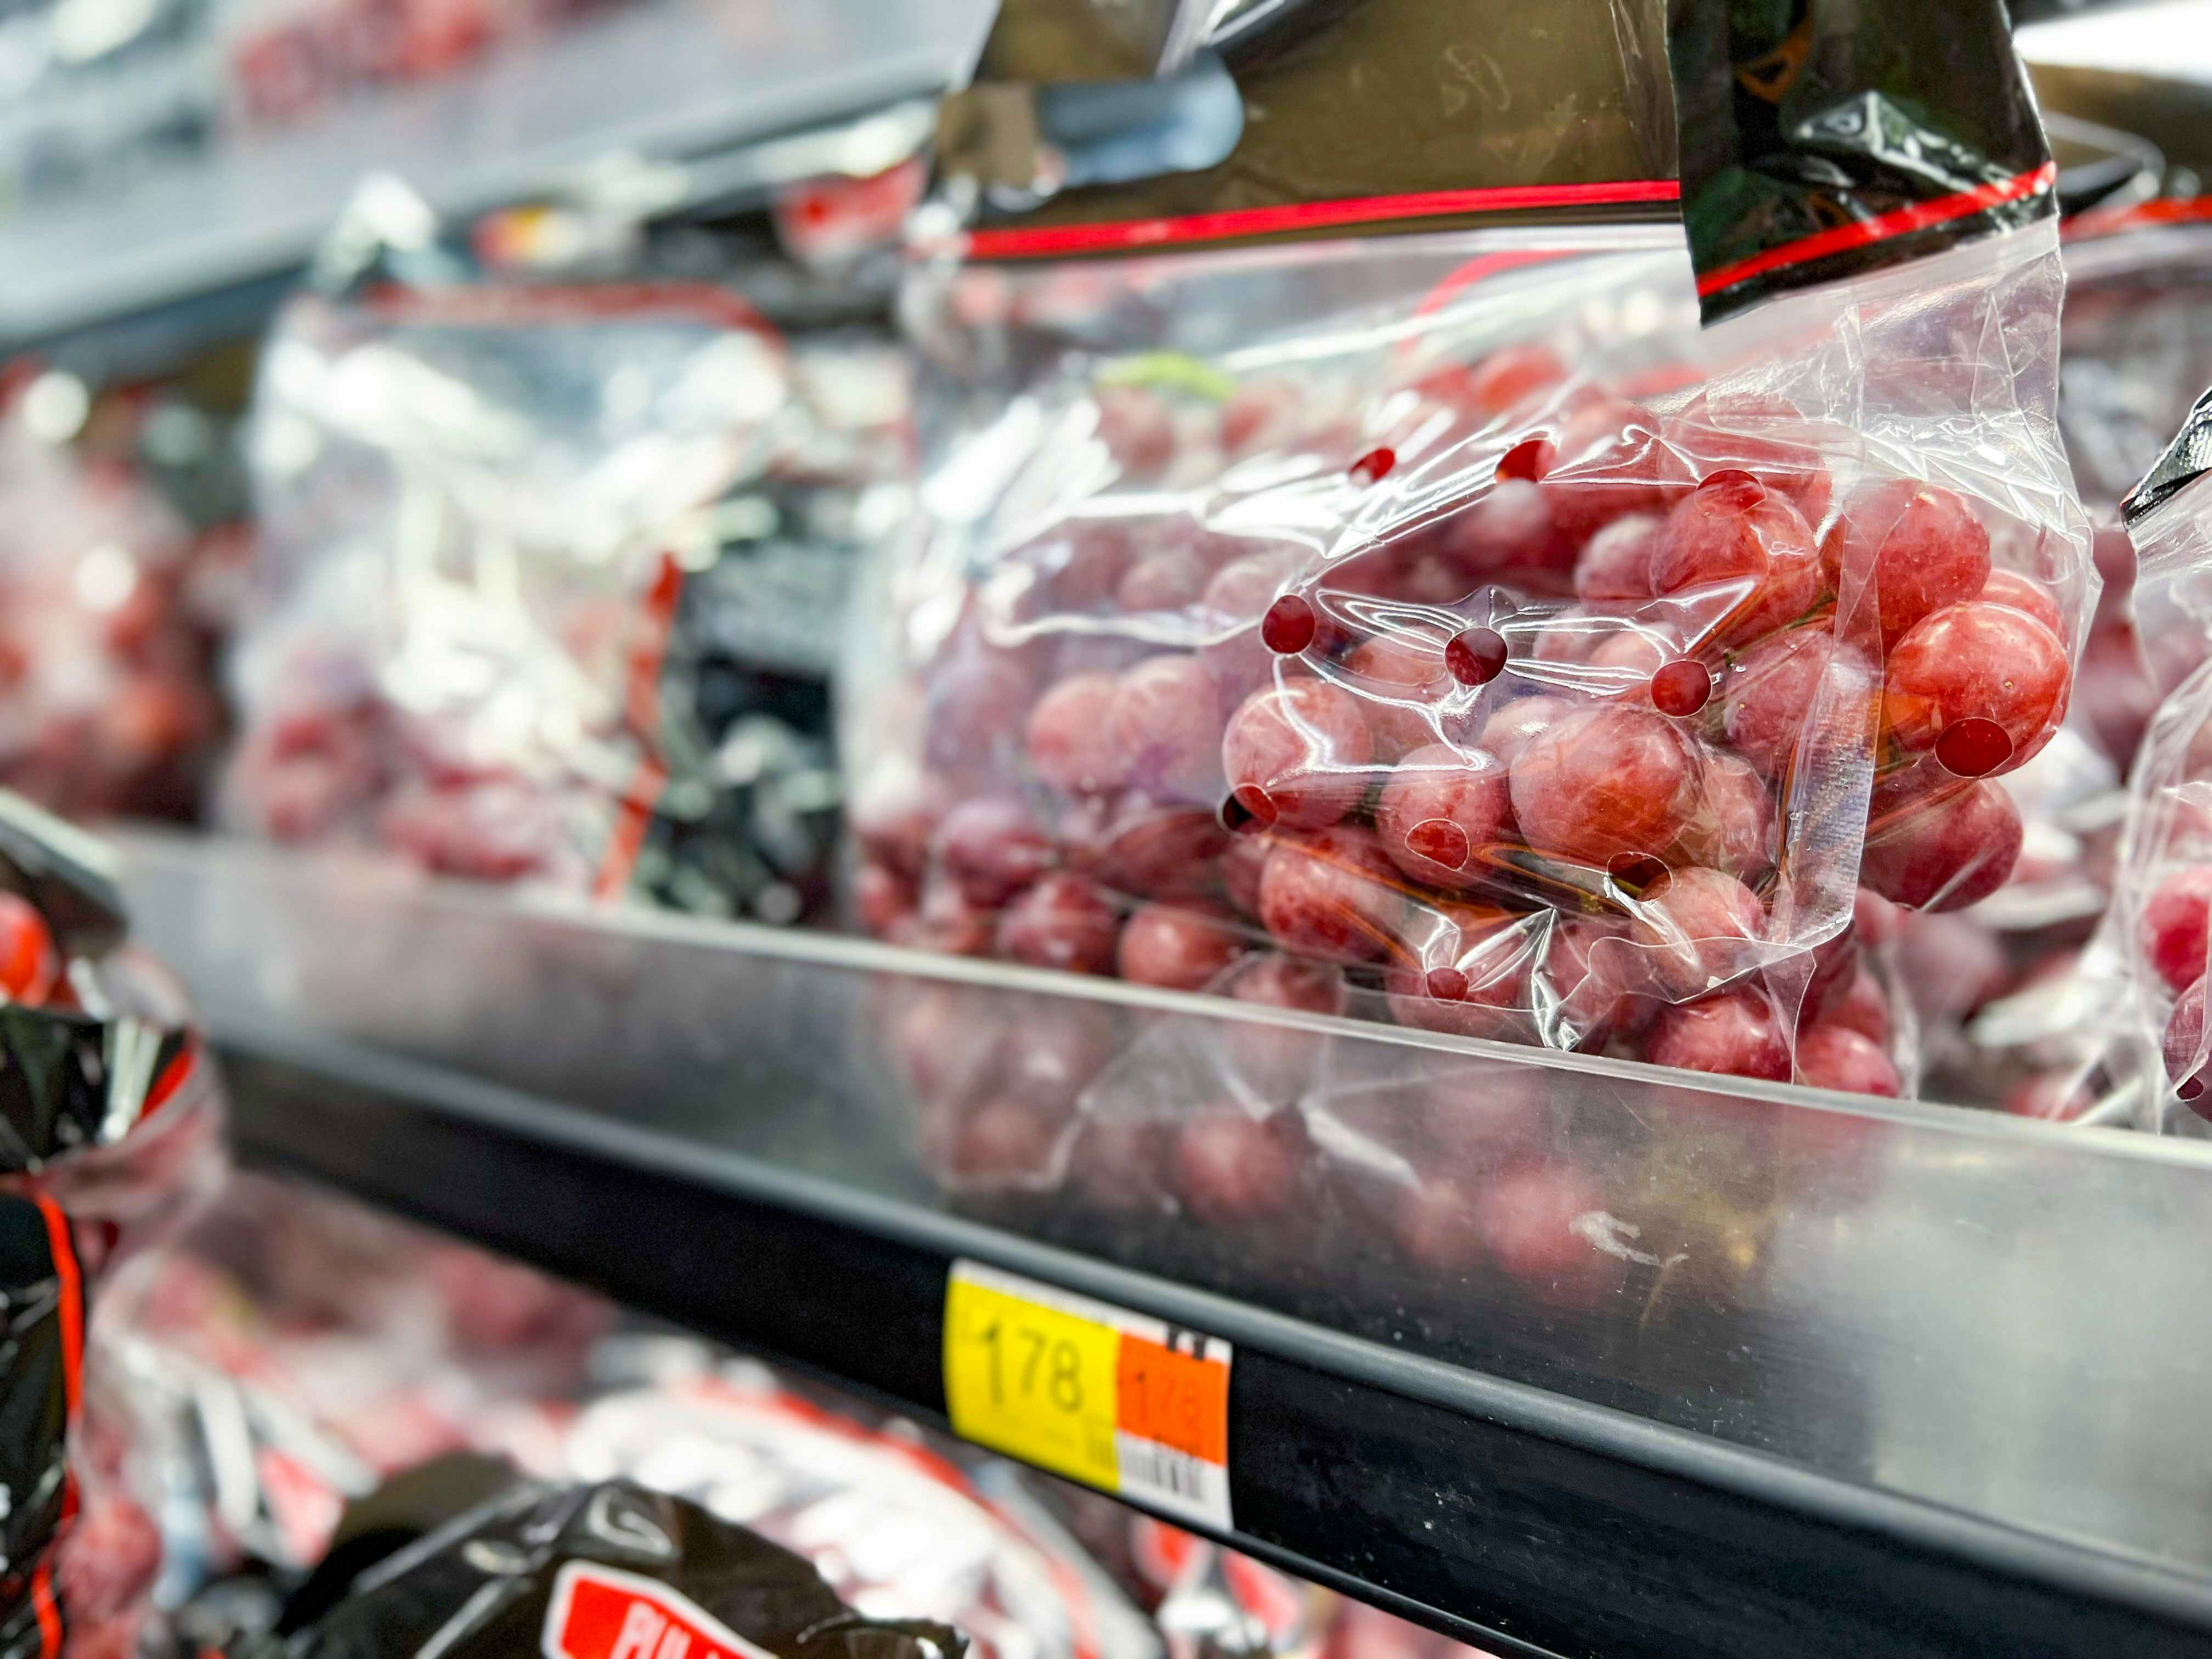 bag of grapes with price walmart